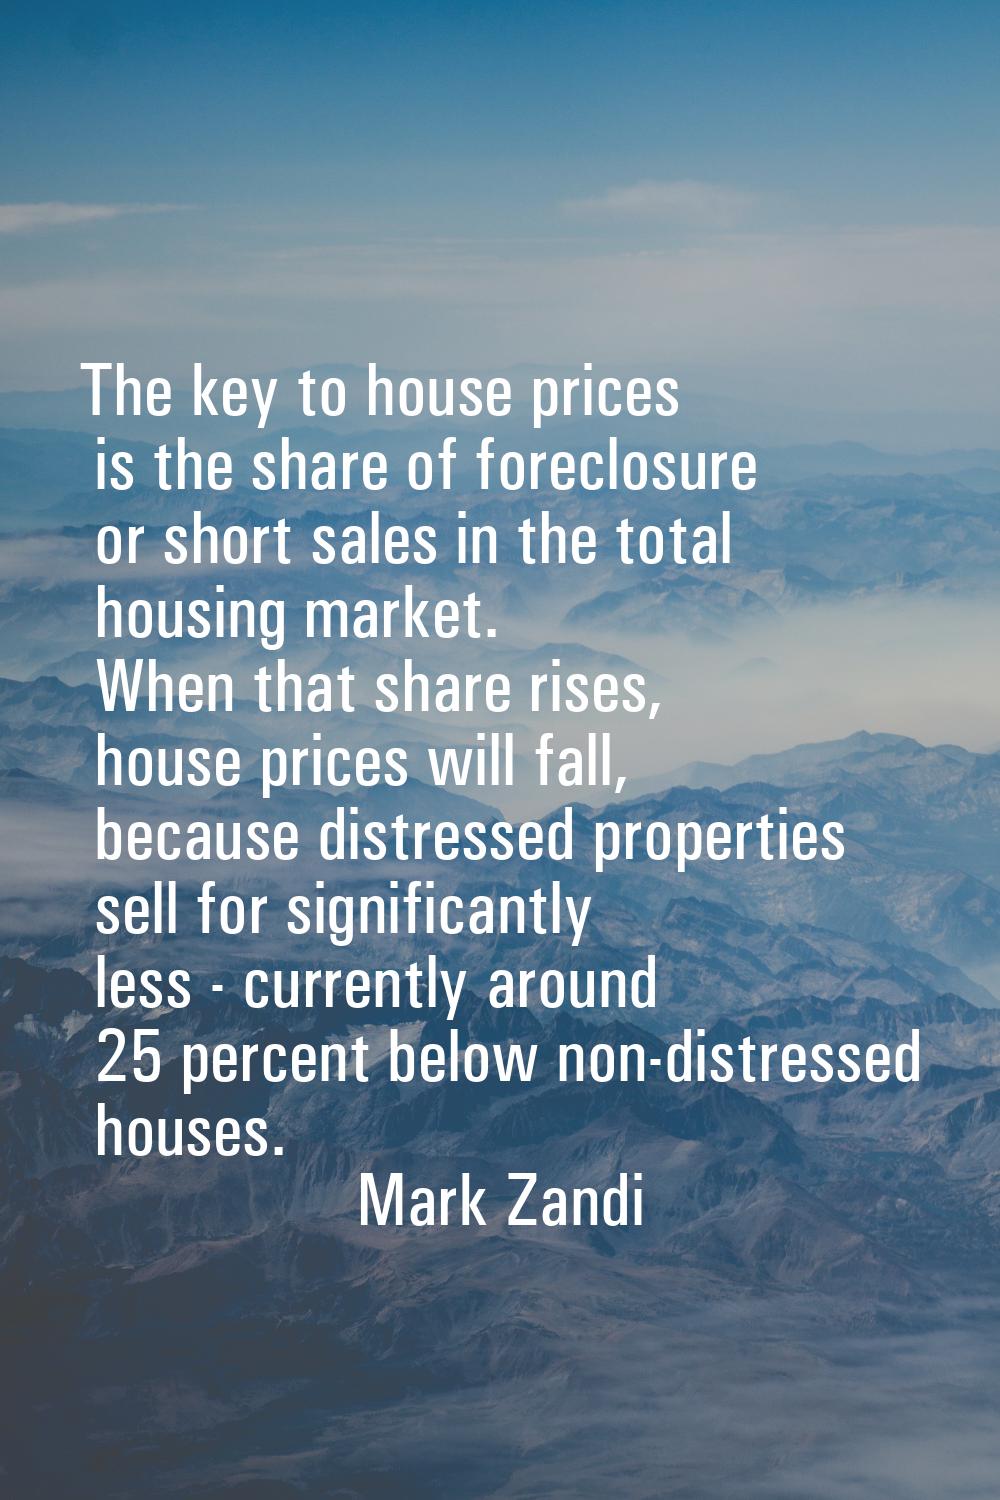 The key to house prices is the share of foreclosure or short sales in the total housing market. Whe